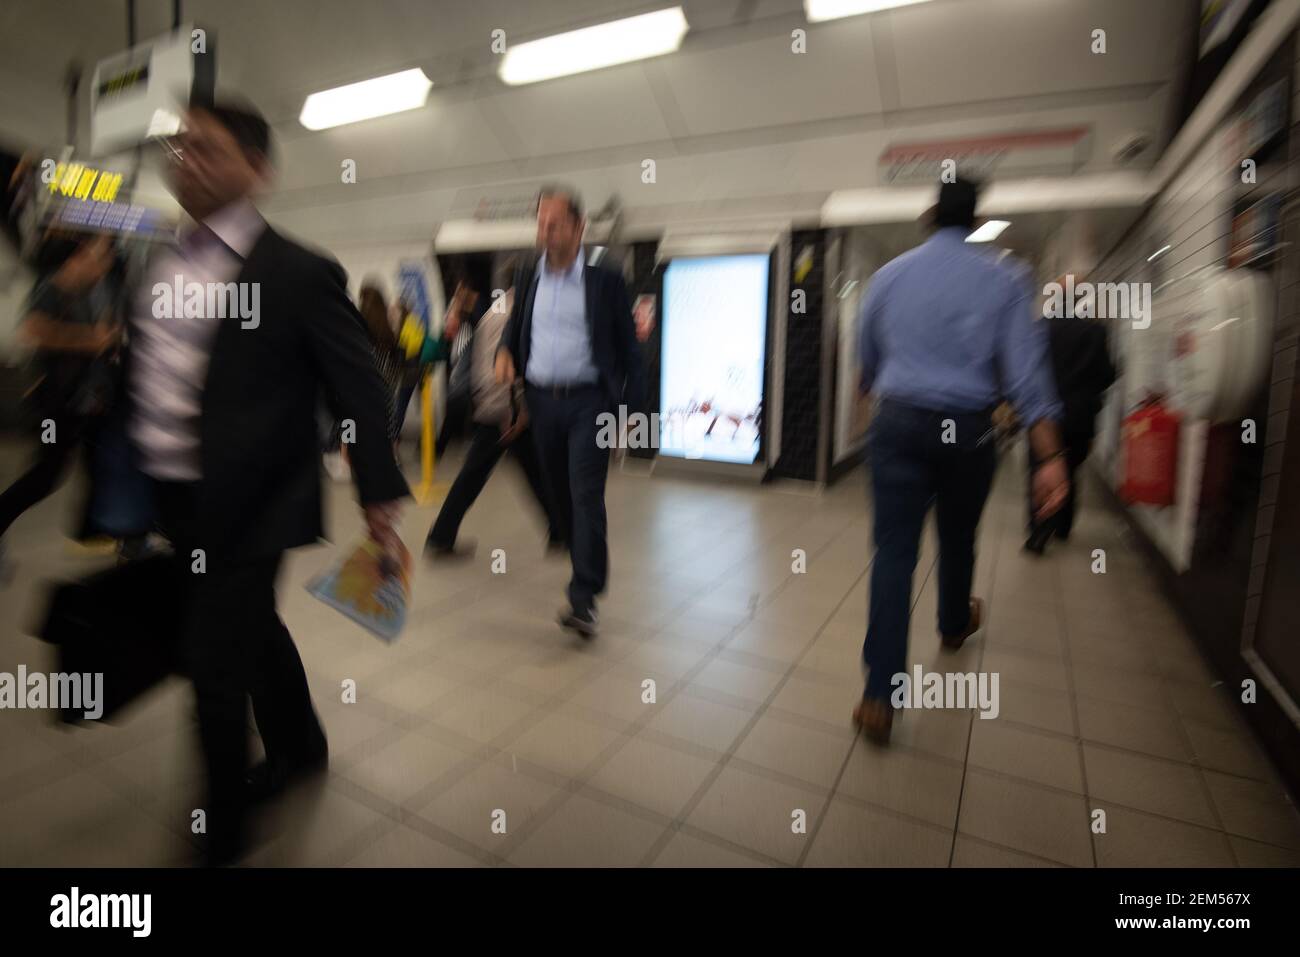 Random unrecognized people at the underground railway tube station during rush hour. Stock Photo